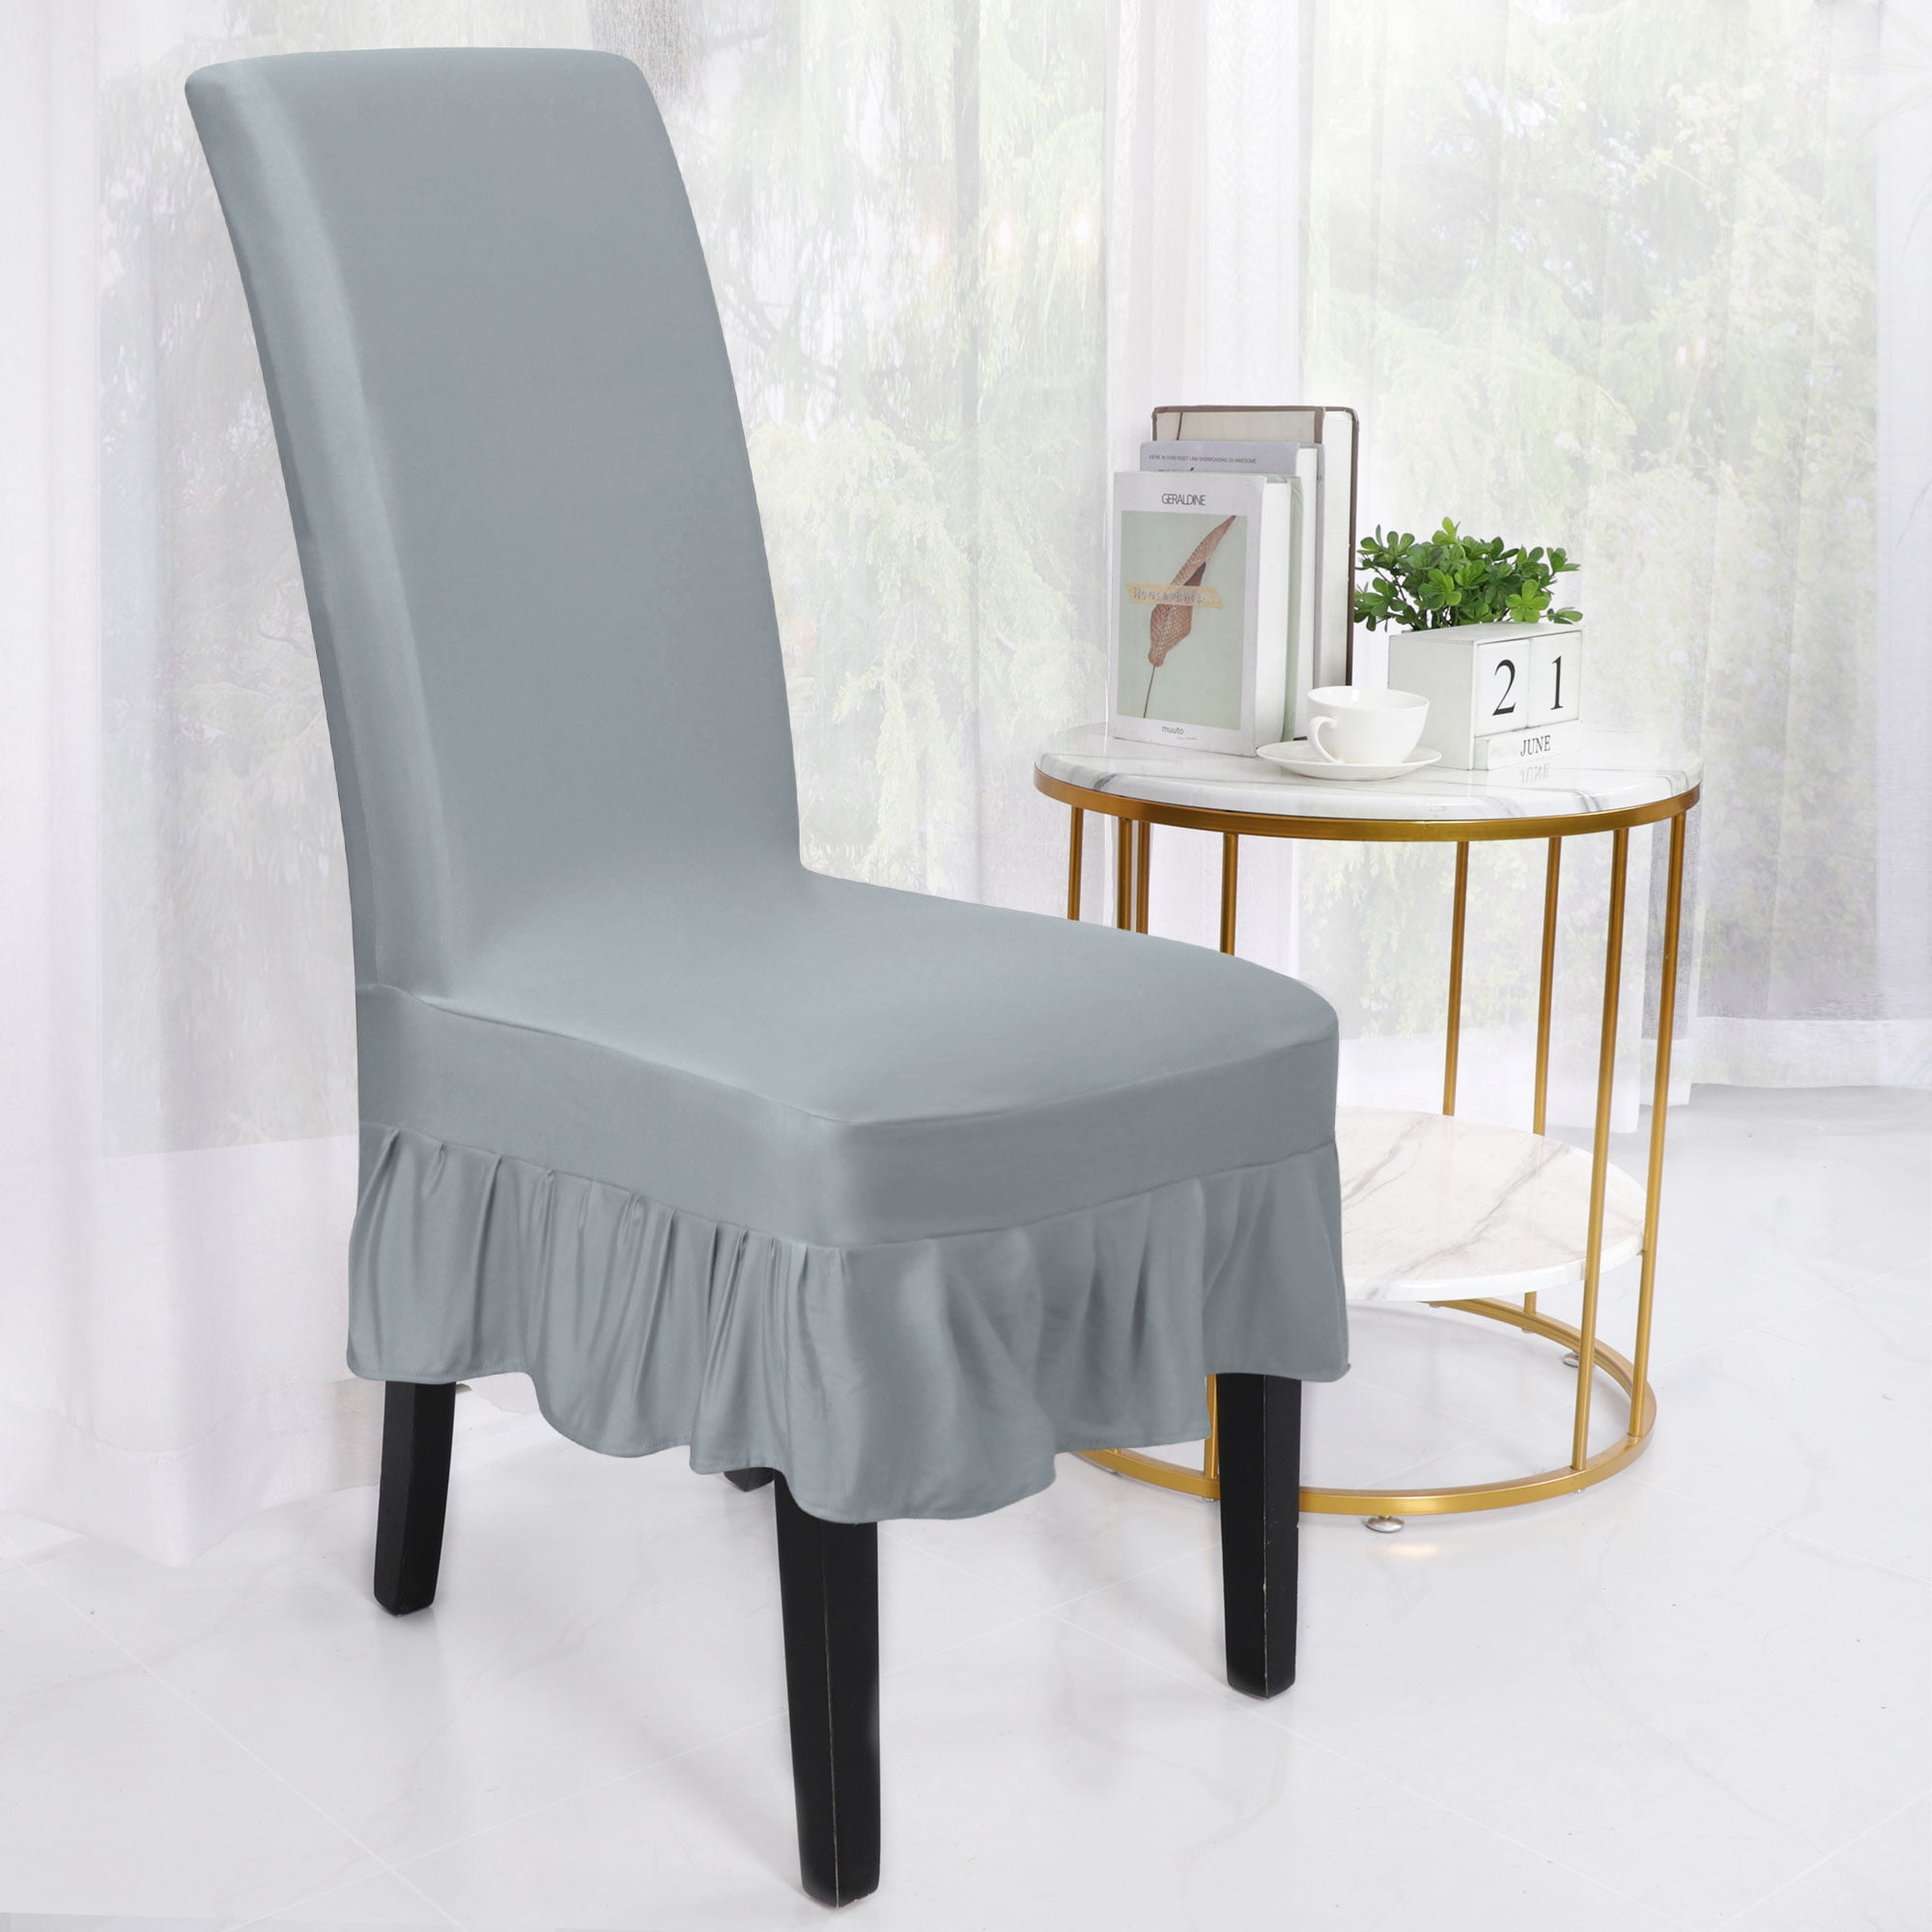 Details about   Polyester Spandex Folding Chair Cover Flat Covers Wedding Party Banquet Decor 